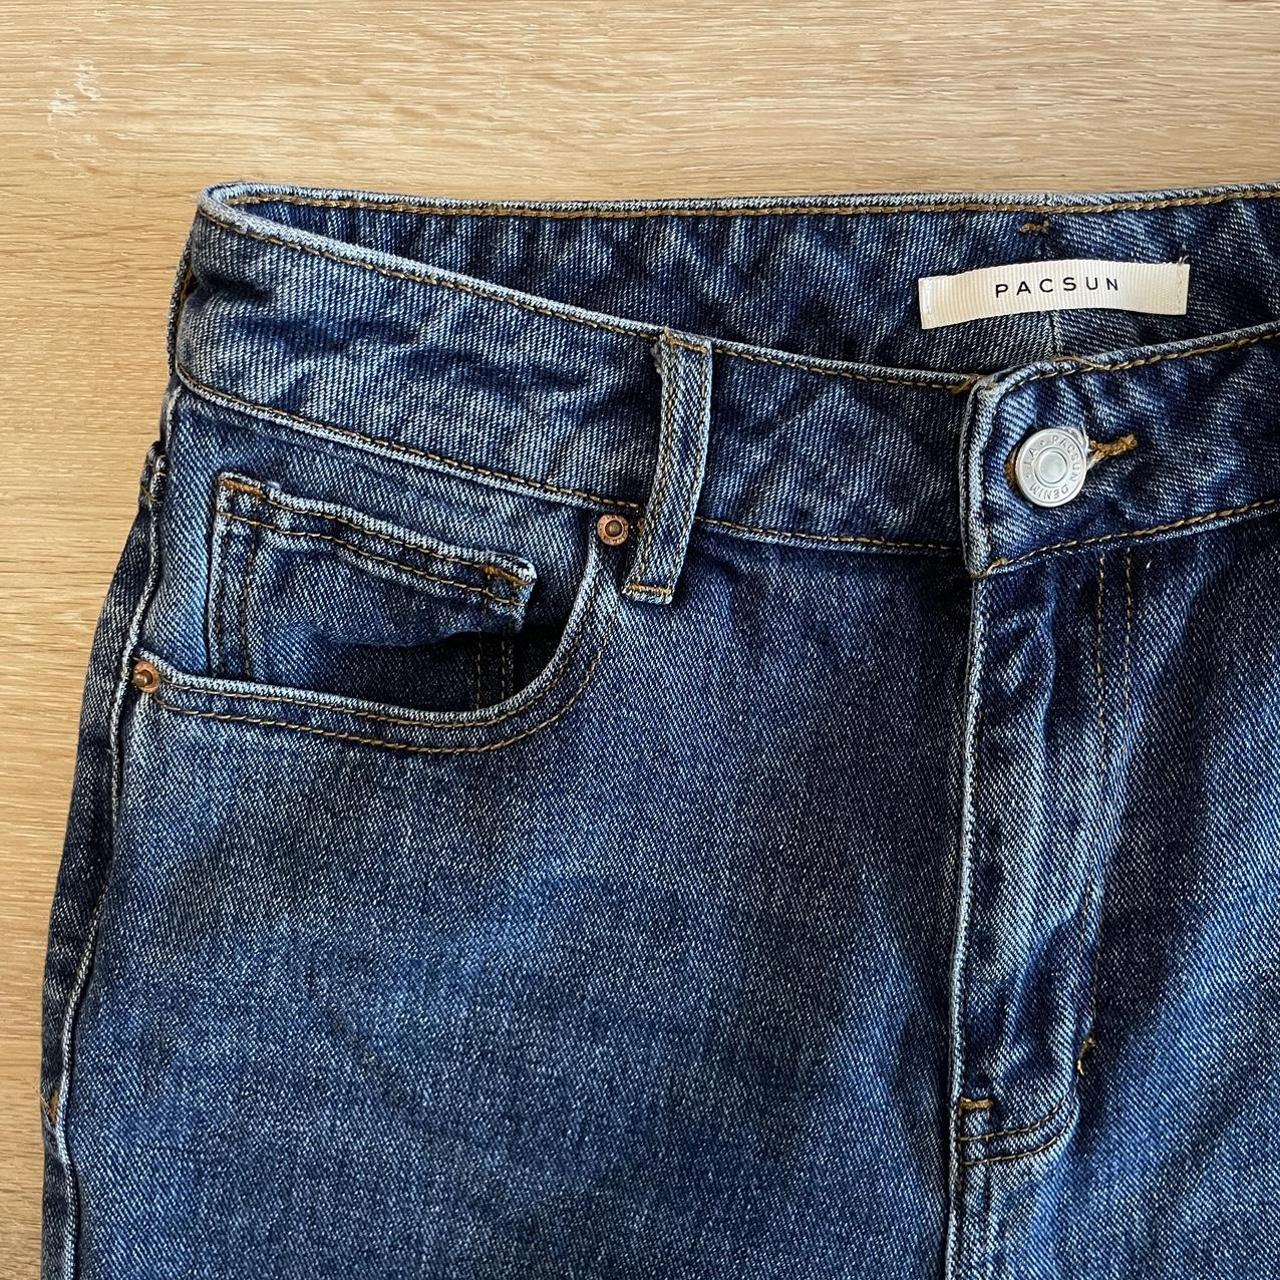 Pacsun Distressed Mom Jeans Size 28, fits a little... - Depop